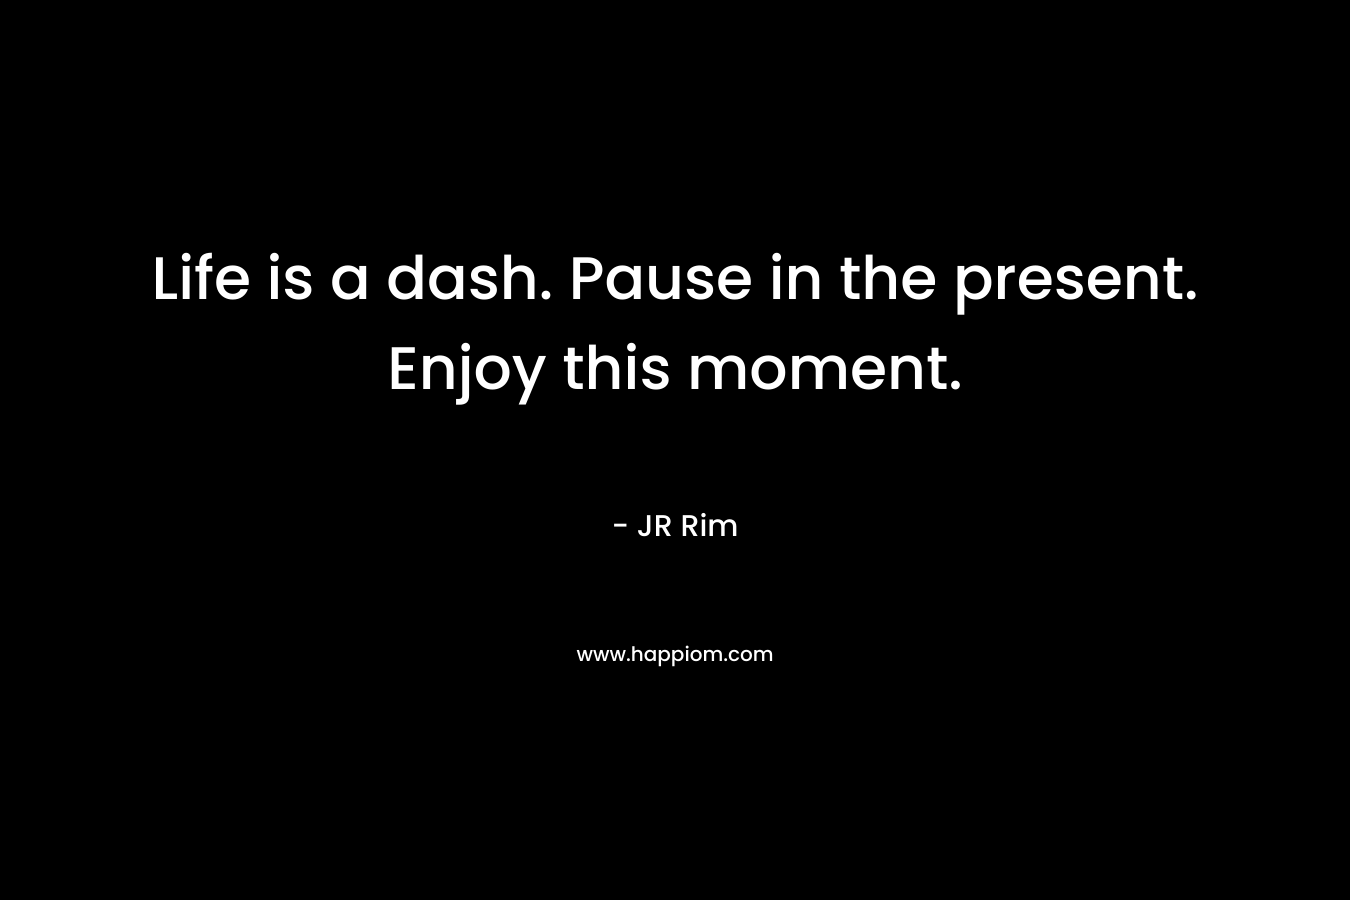 Life is a dash. Pause in the present. Enjoy this moment. – JR Rim